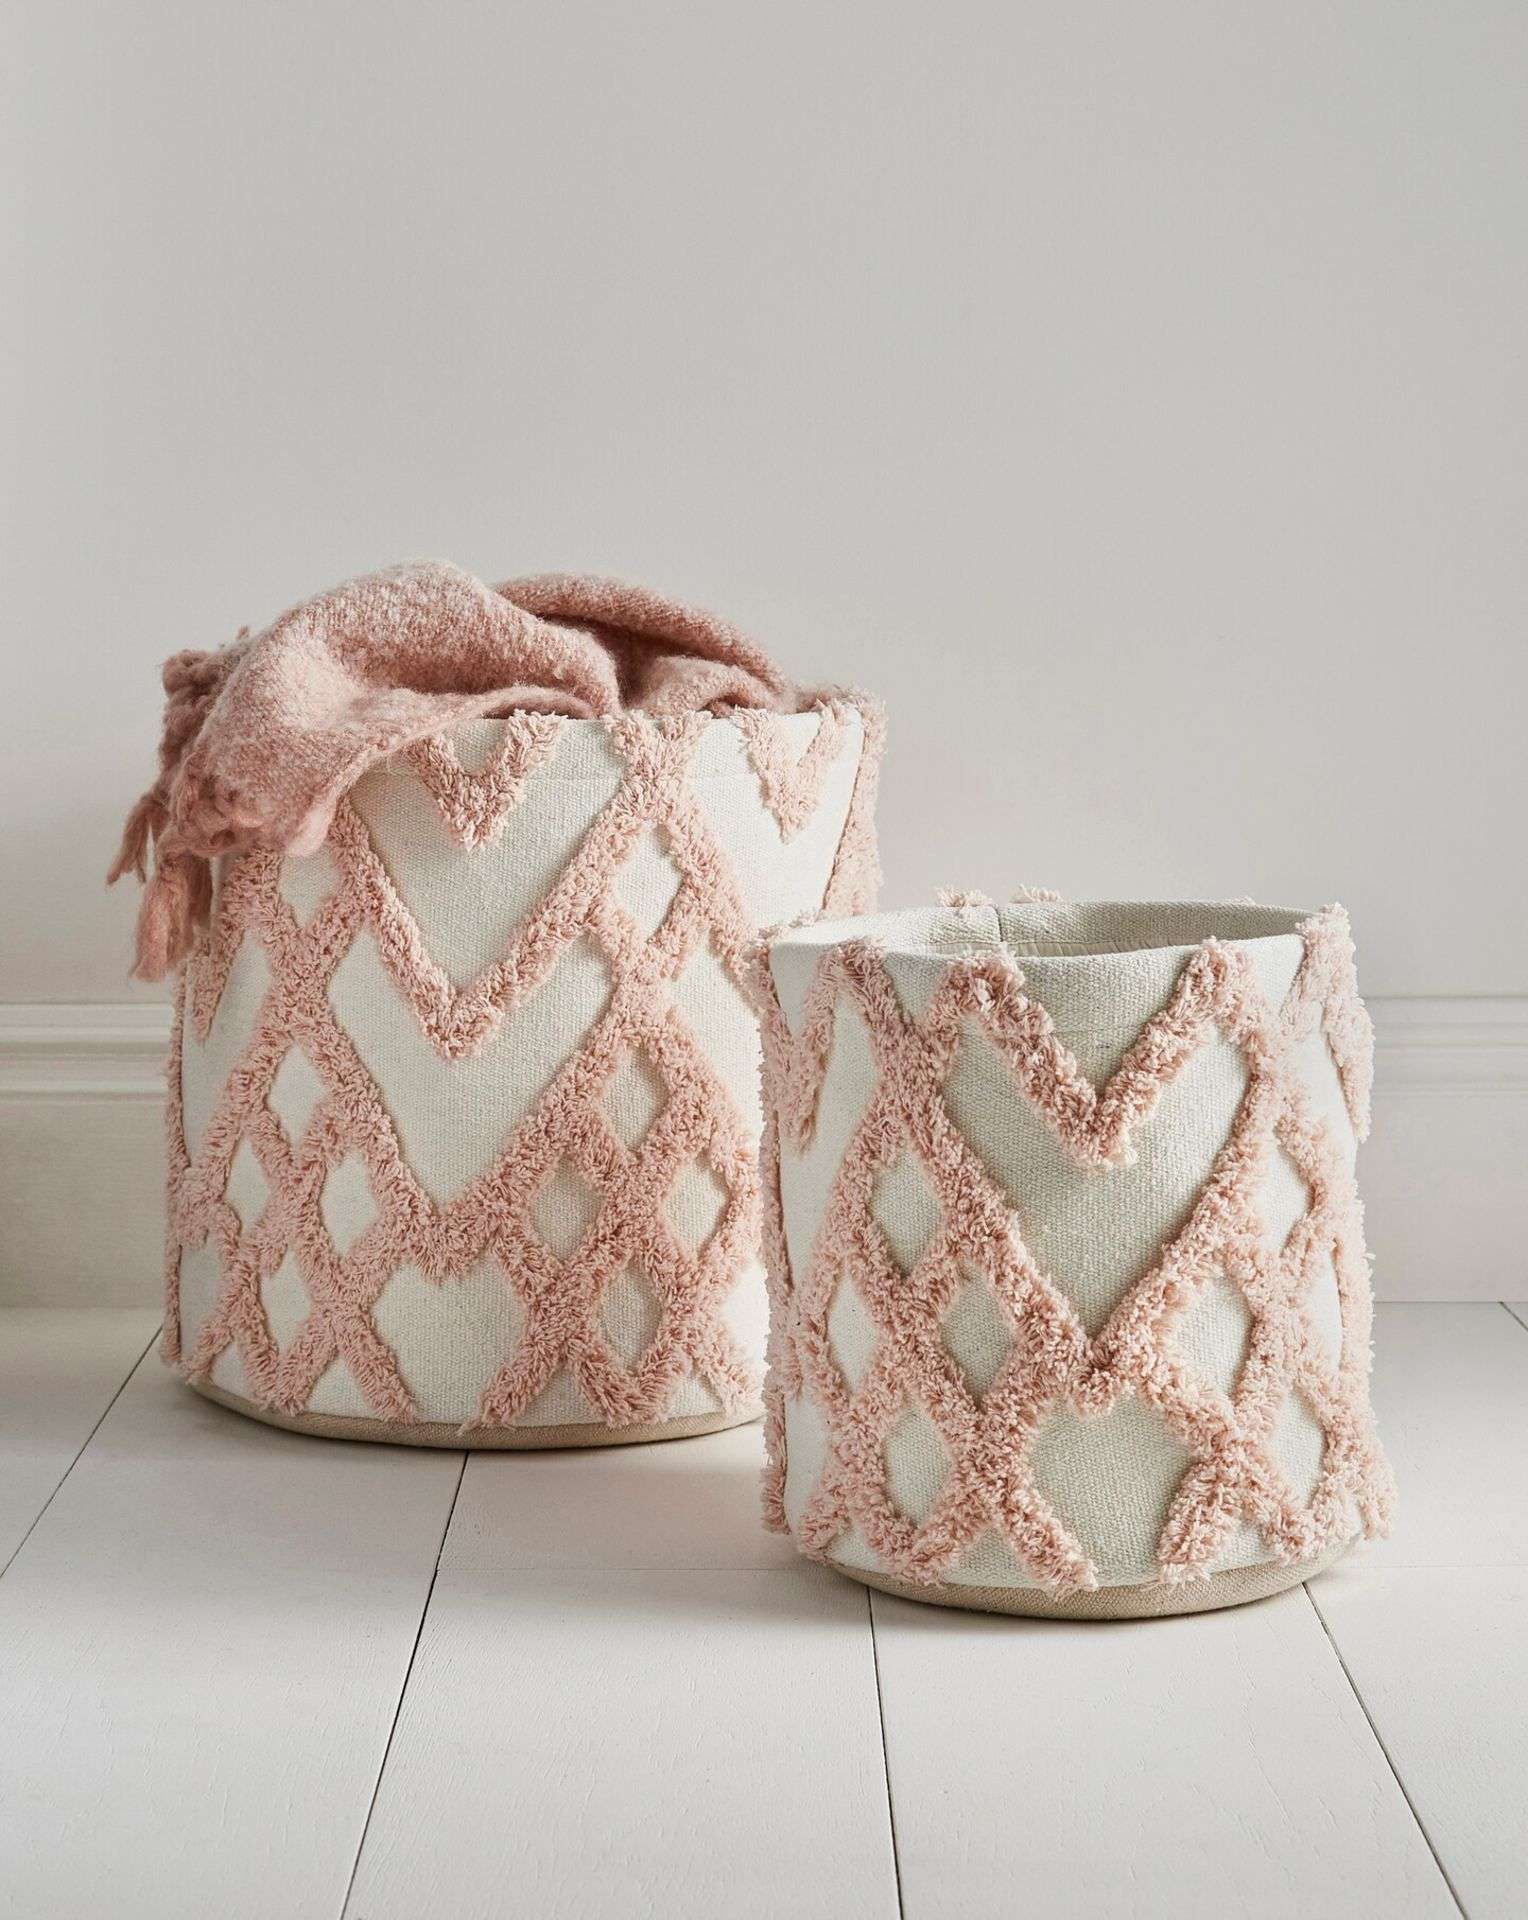 2x BRAND NEW SETS OF 2 PINK RUFFLE BASKETS (INSL)